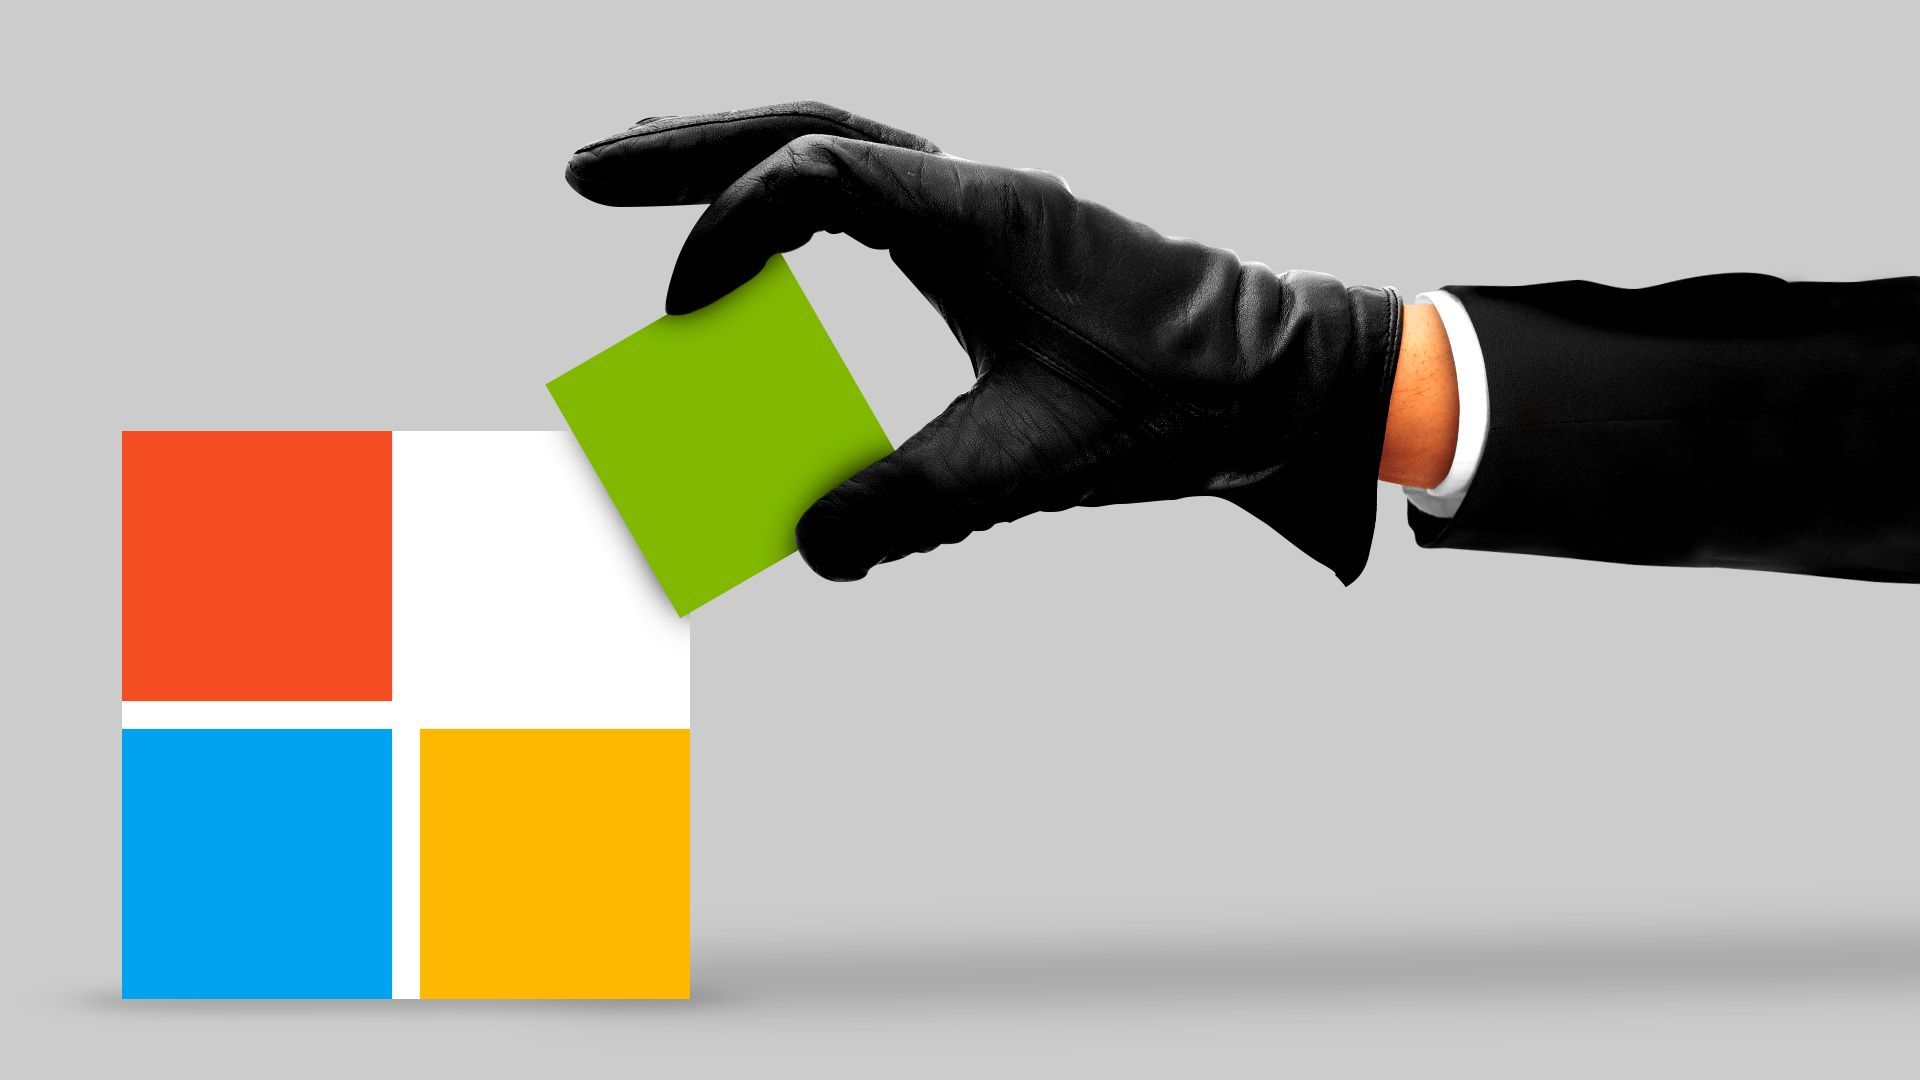 Illustration of a robber's hand taking away a block of the Microsoft logo. 